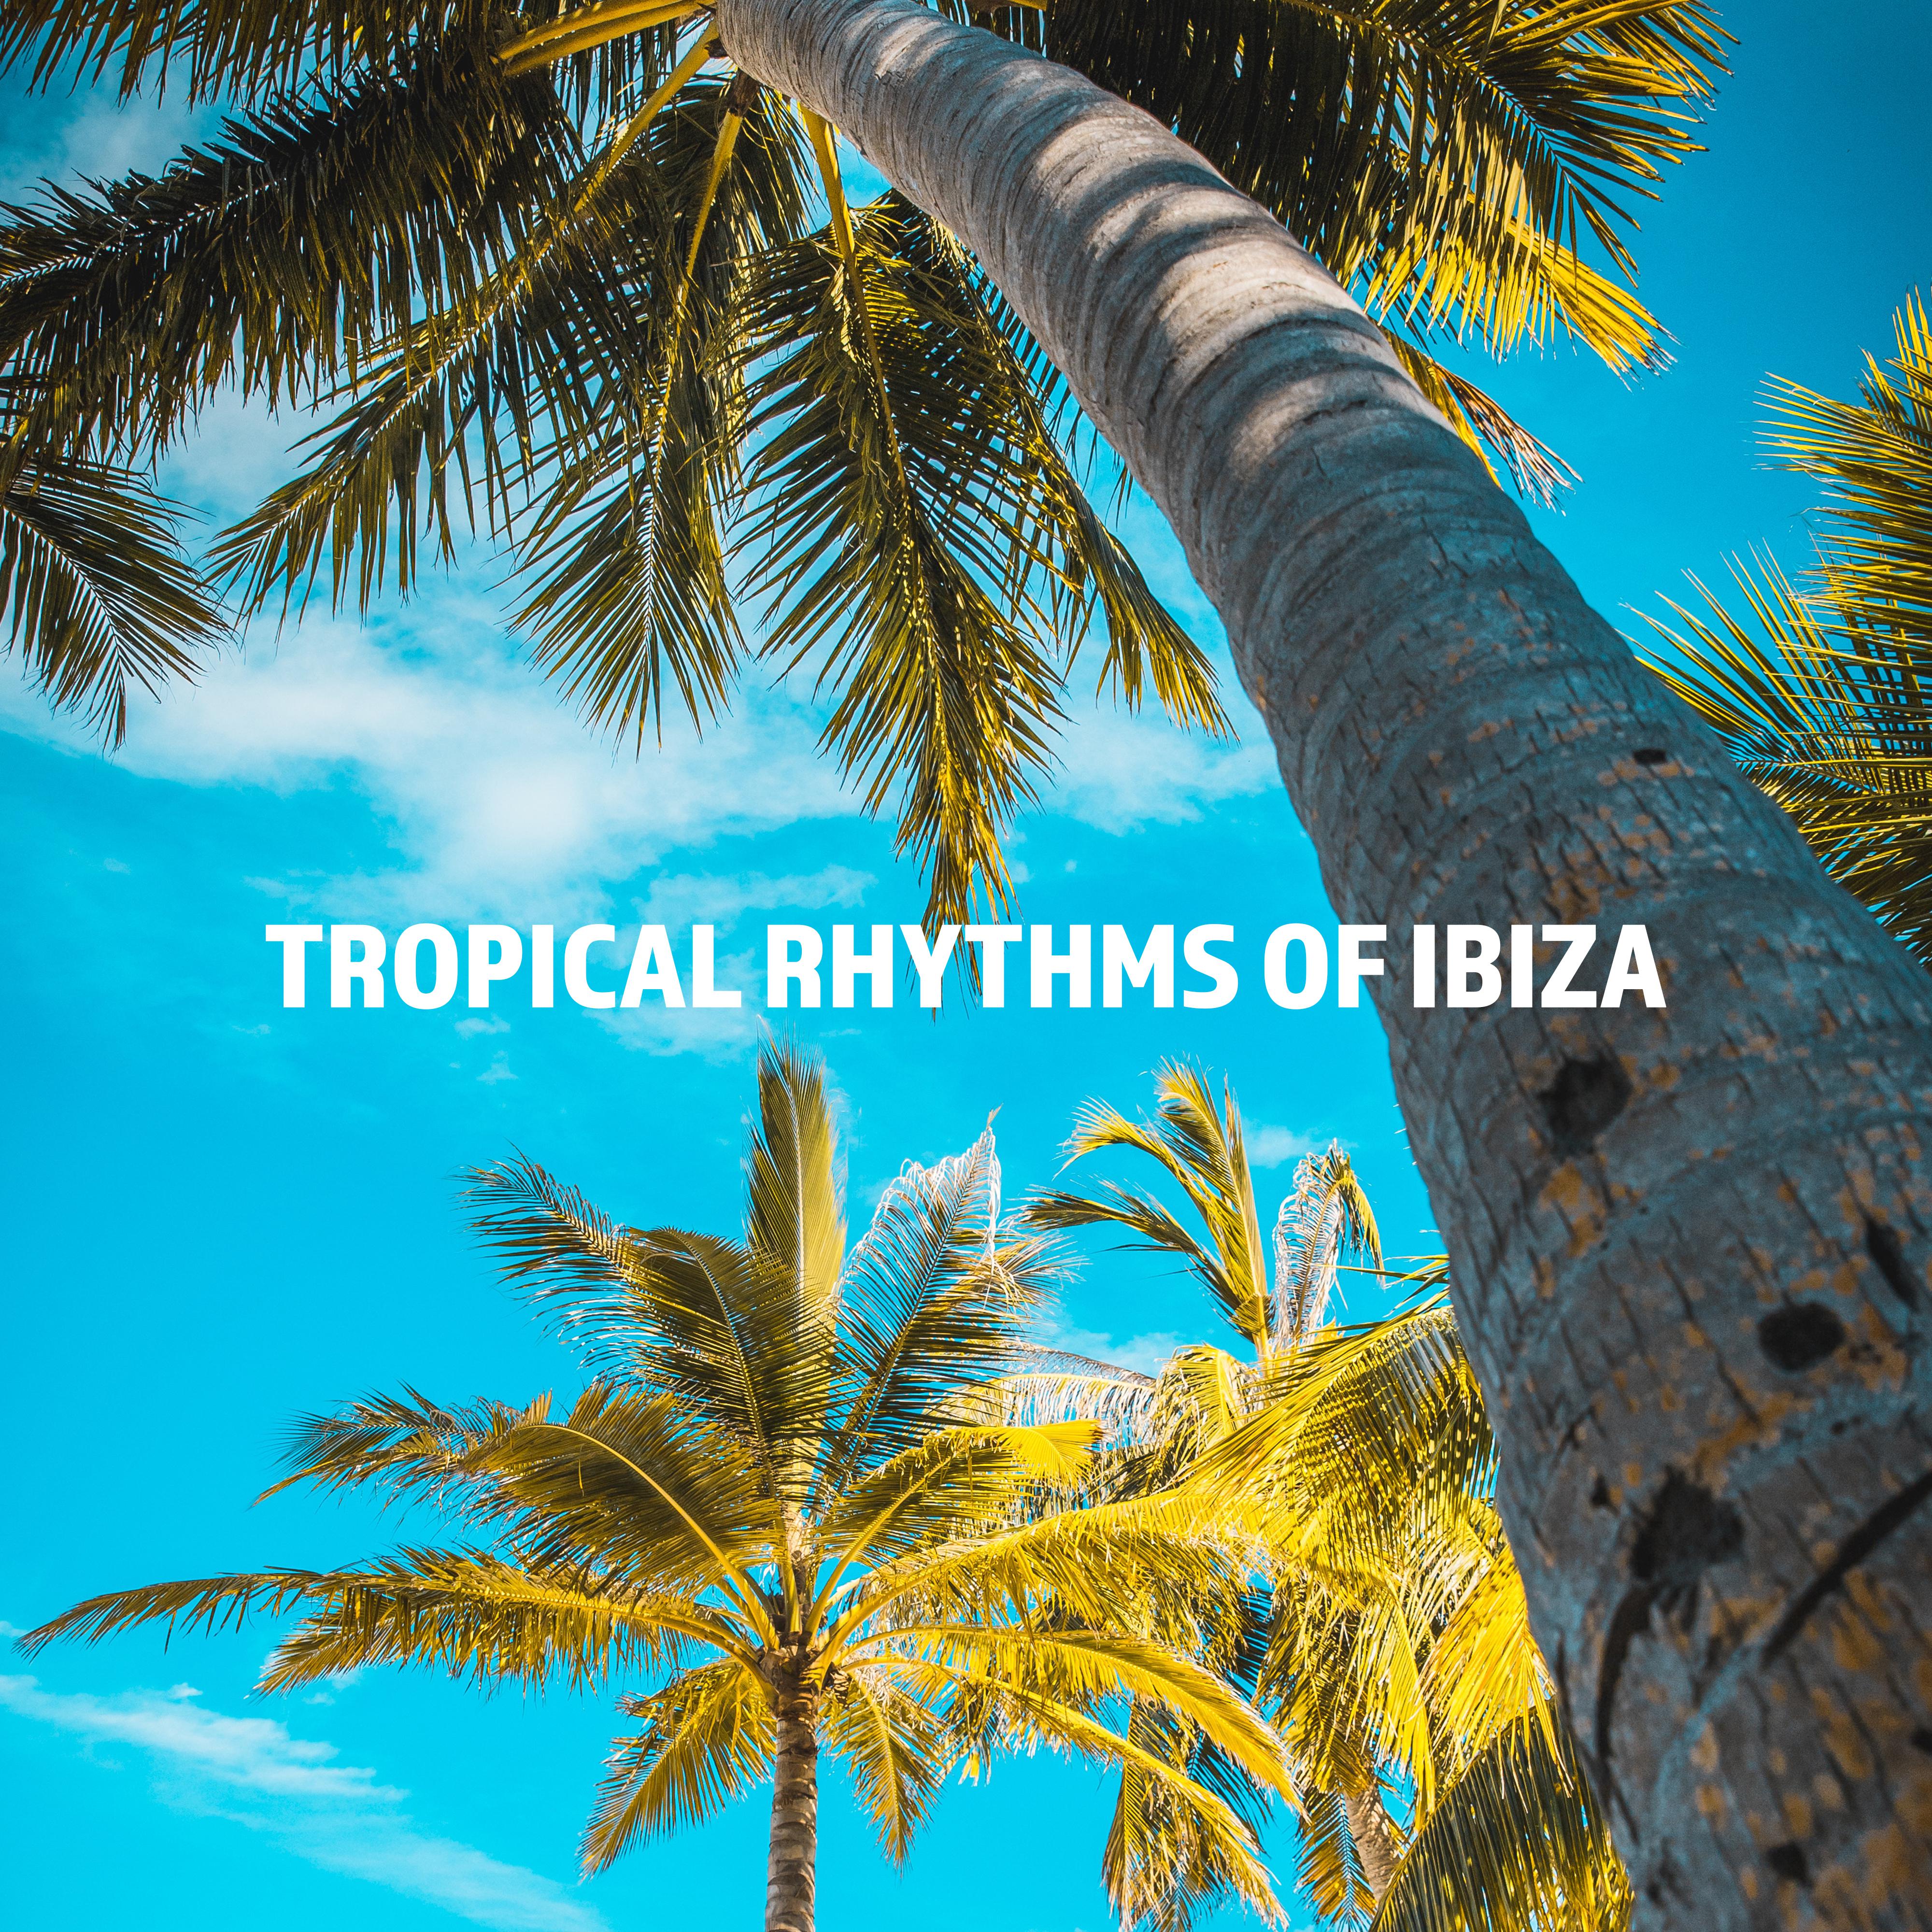 Tropical Rhythms of Ibiza: Summertime Chillout Set for Holidays on Sunny Ibiza, Rest on the Beach, Deepest Relax & Unwind